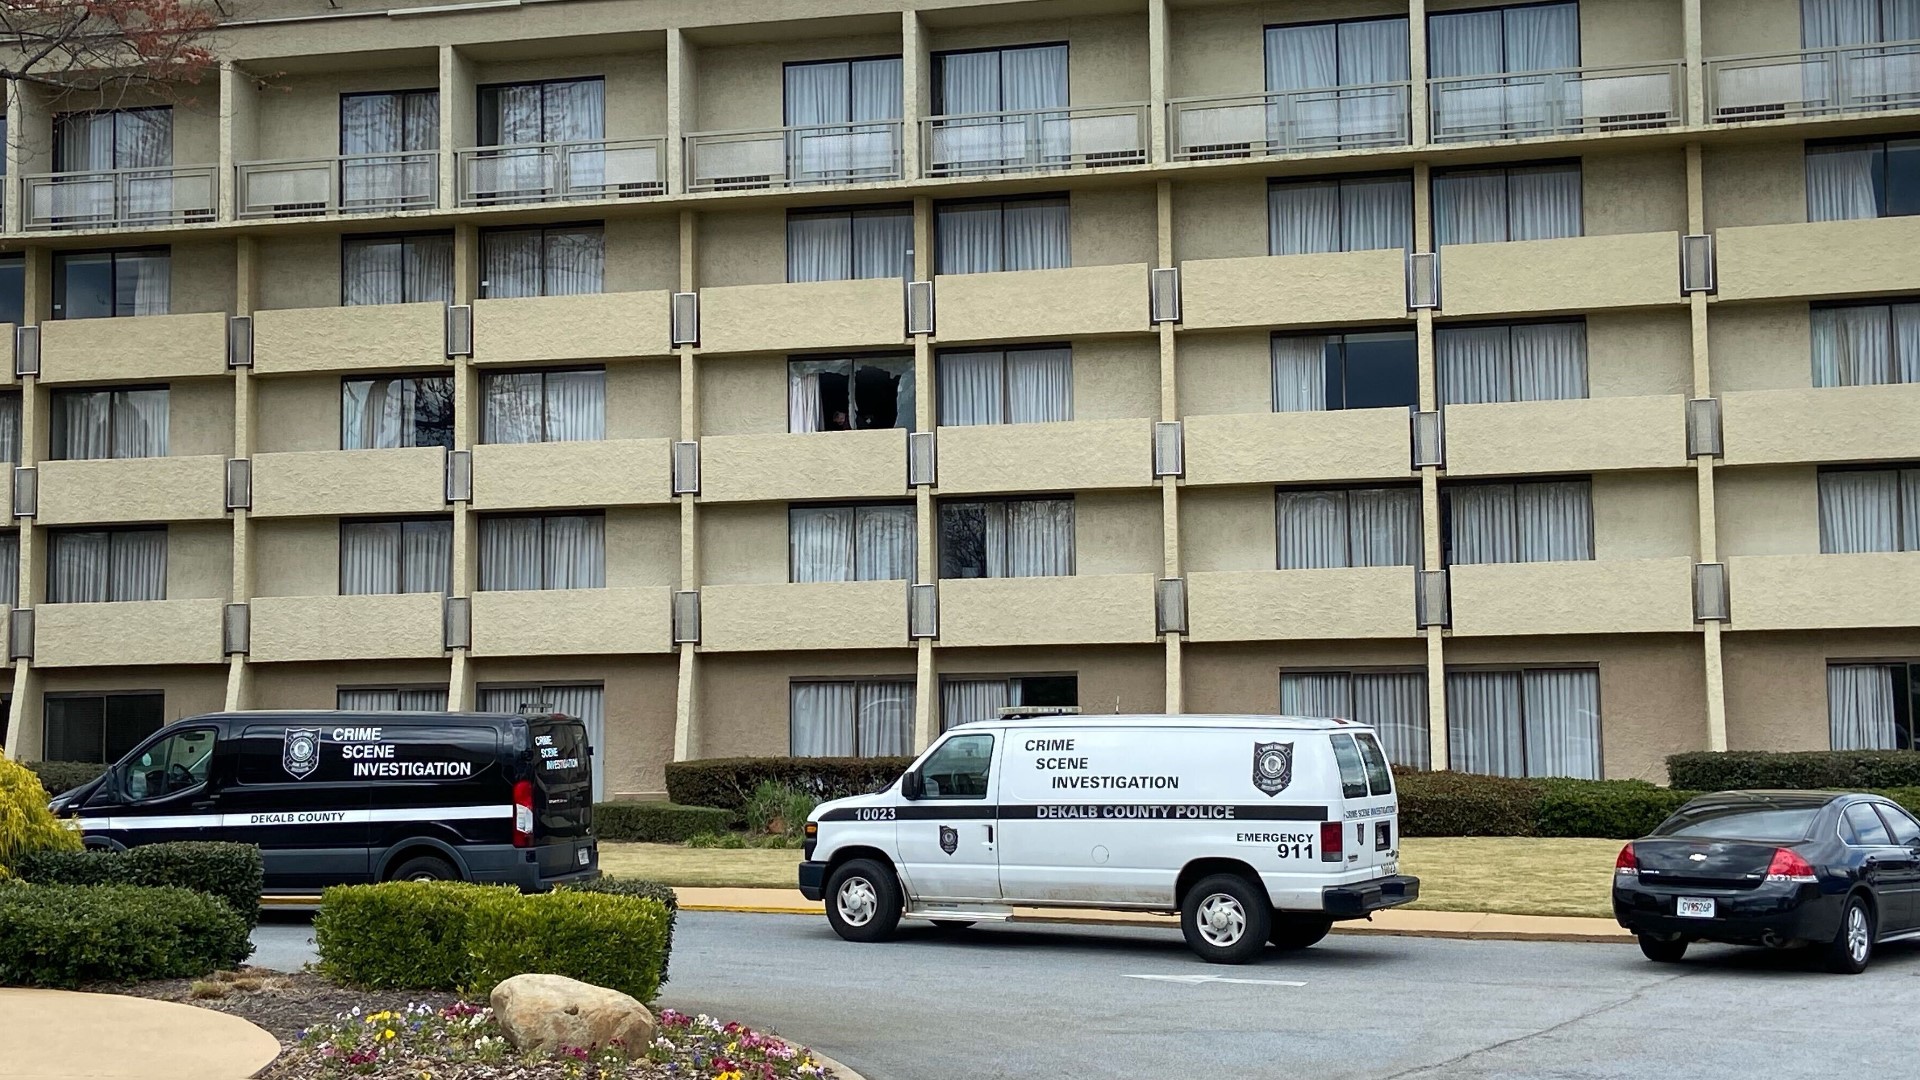 Police said they had limited information, but the shooting happened at the DoubleTree hotel in DeKalb County.